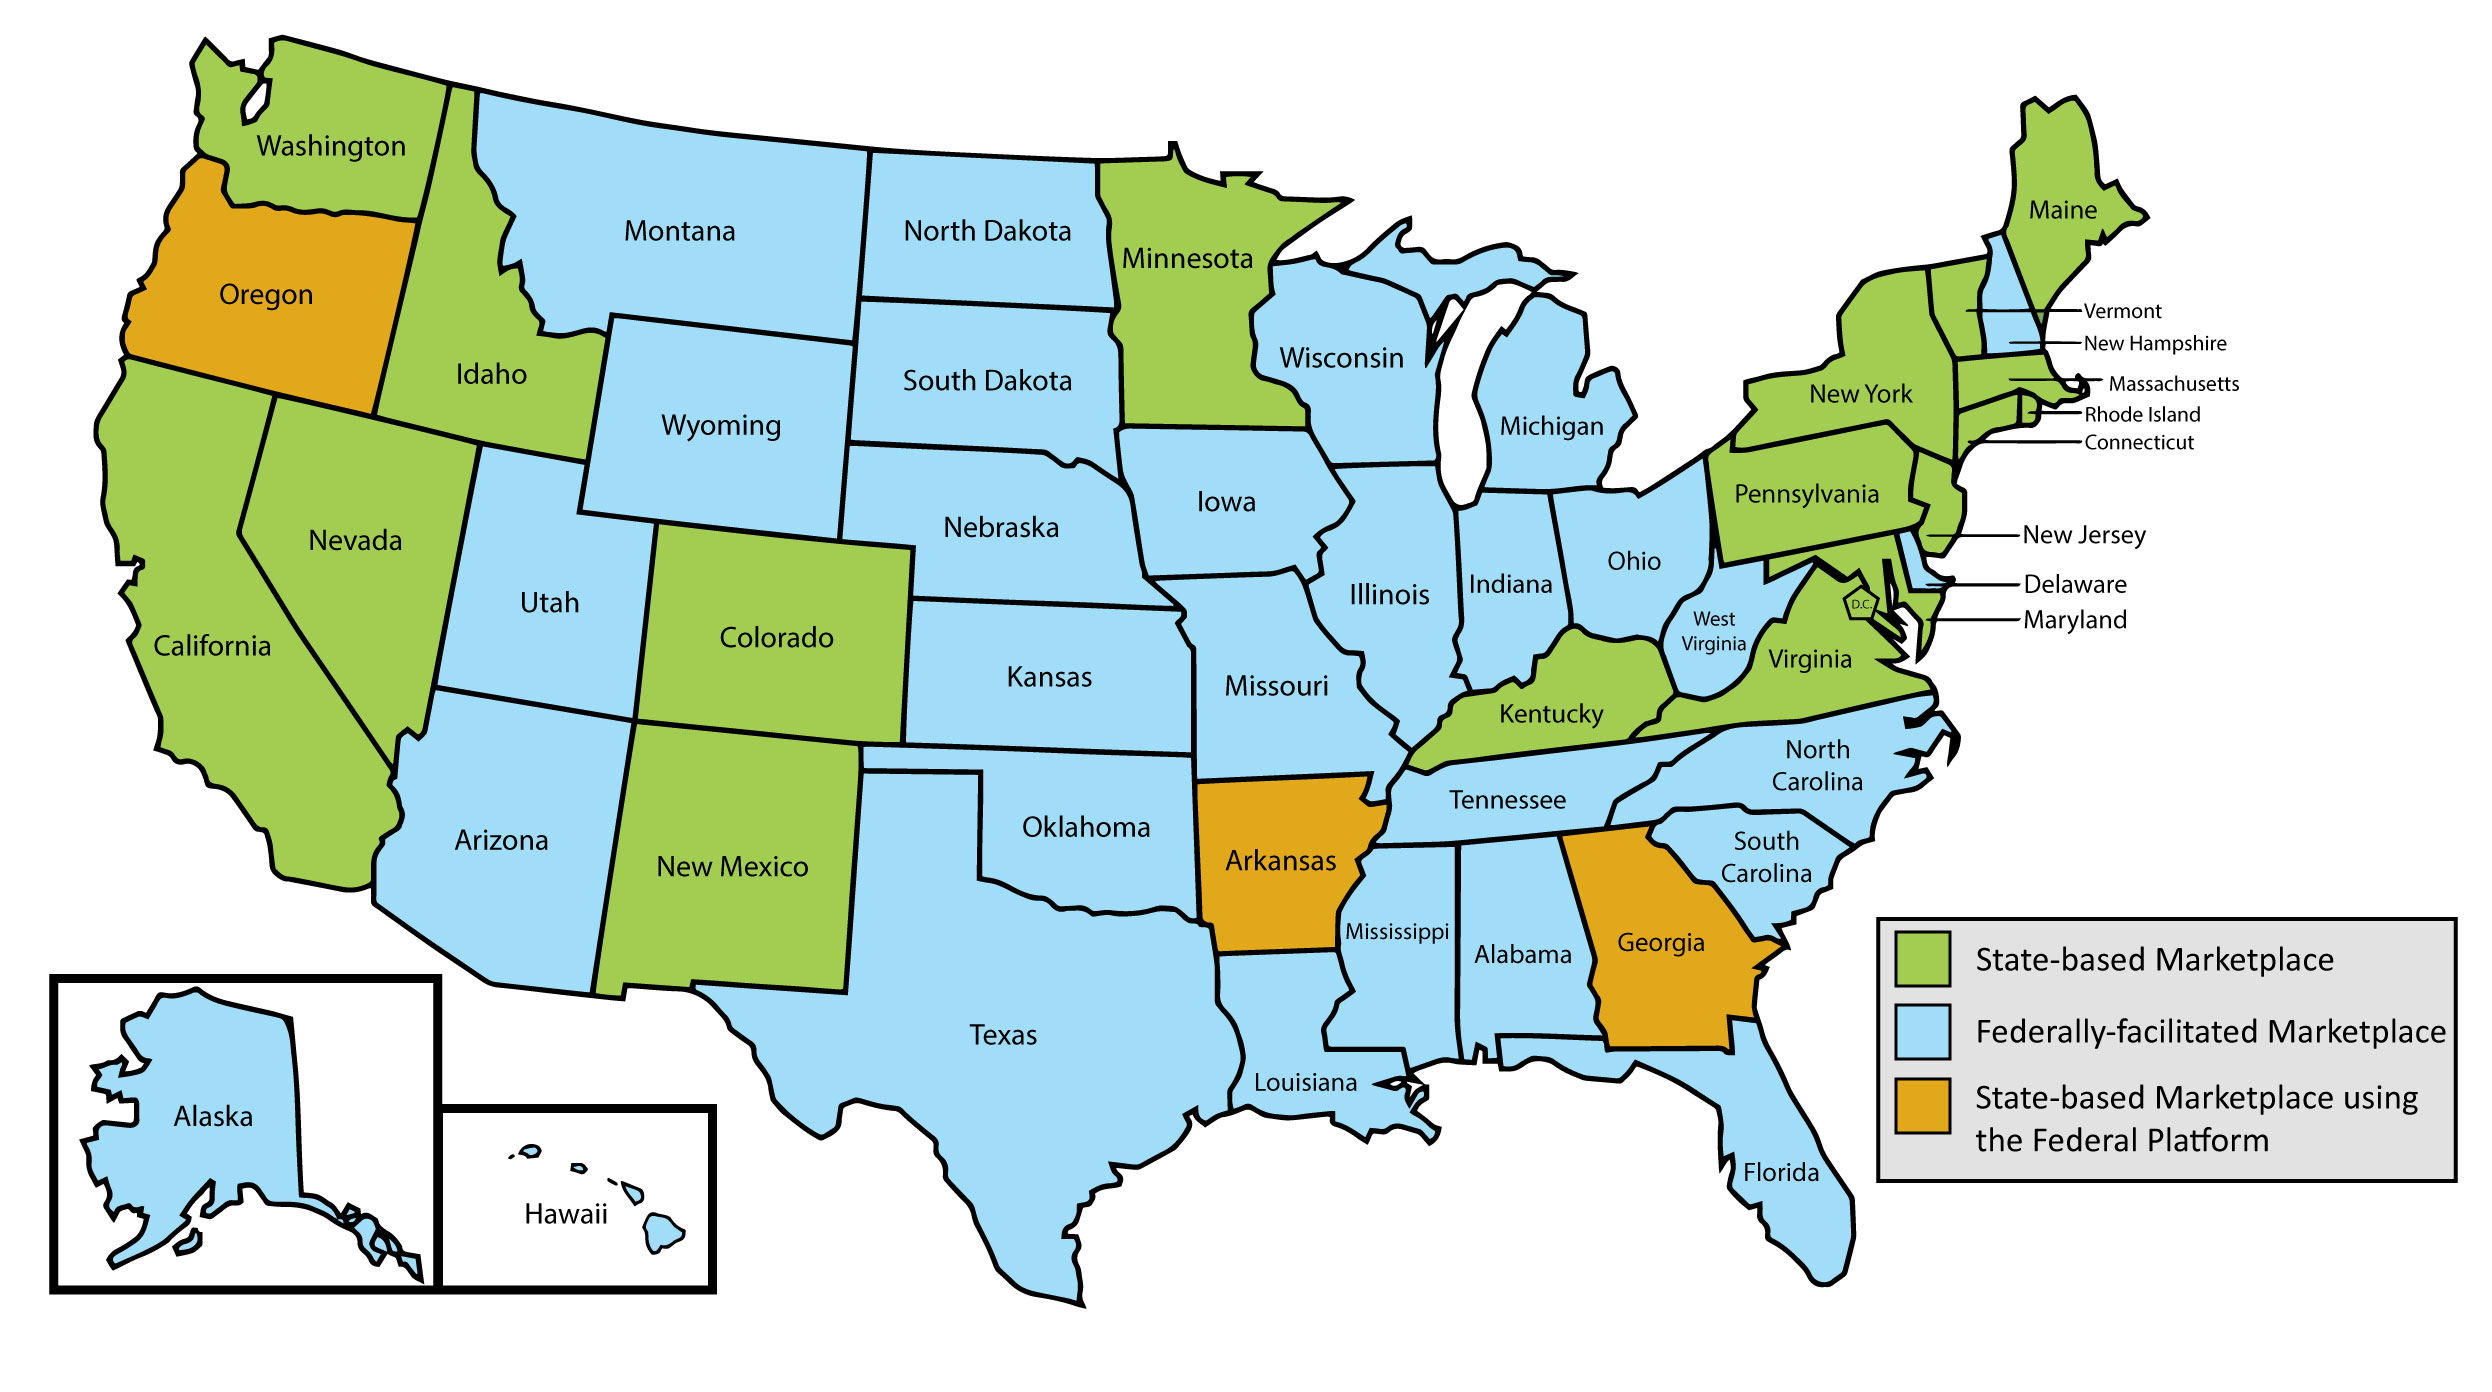 Map of United States showing the states by marketplace type 